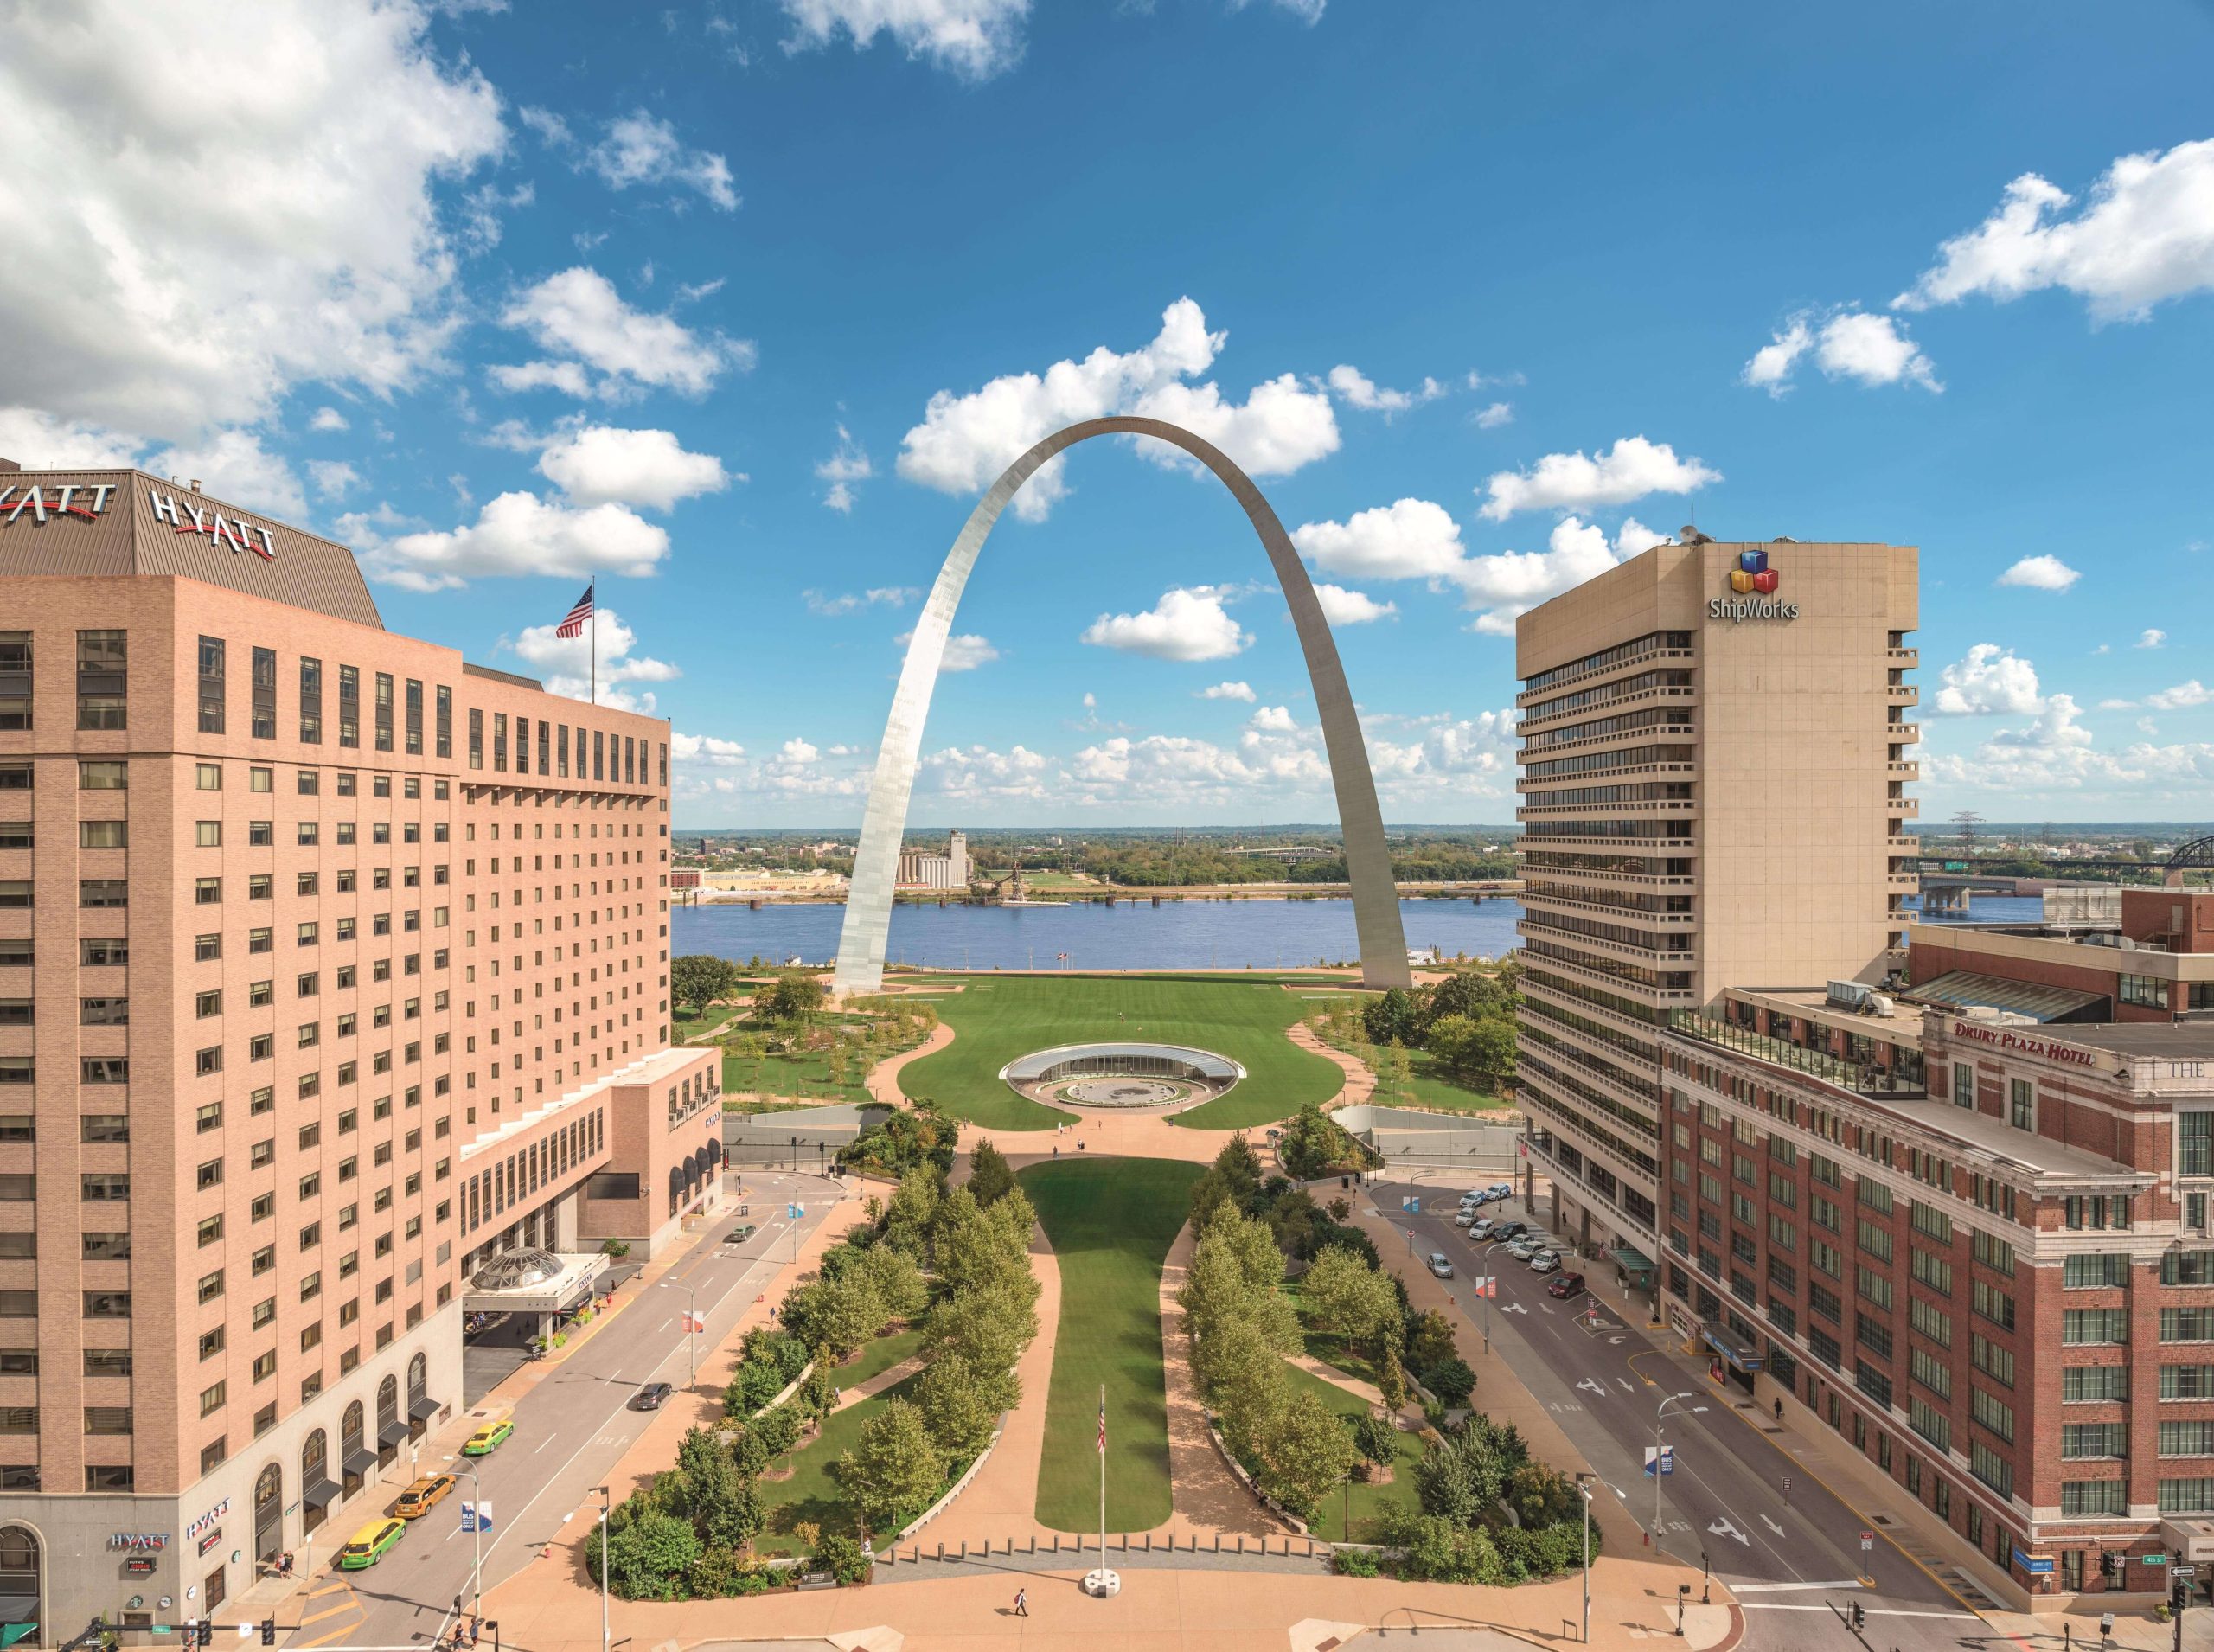 The Gateway Arch stands tall among Missouri National Parks